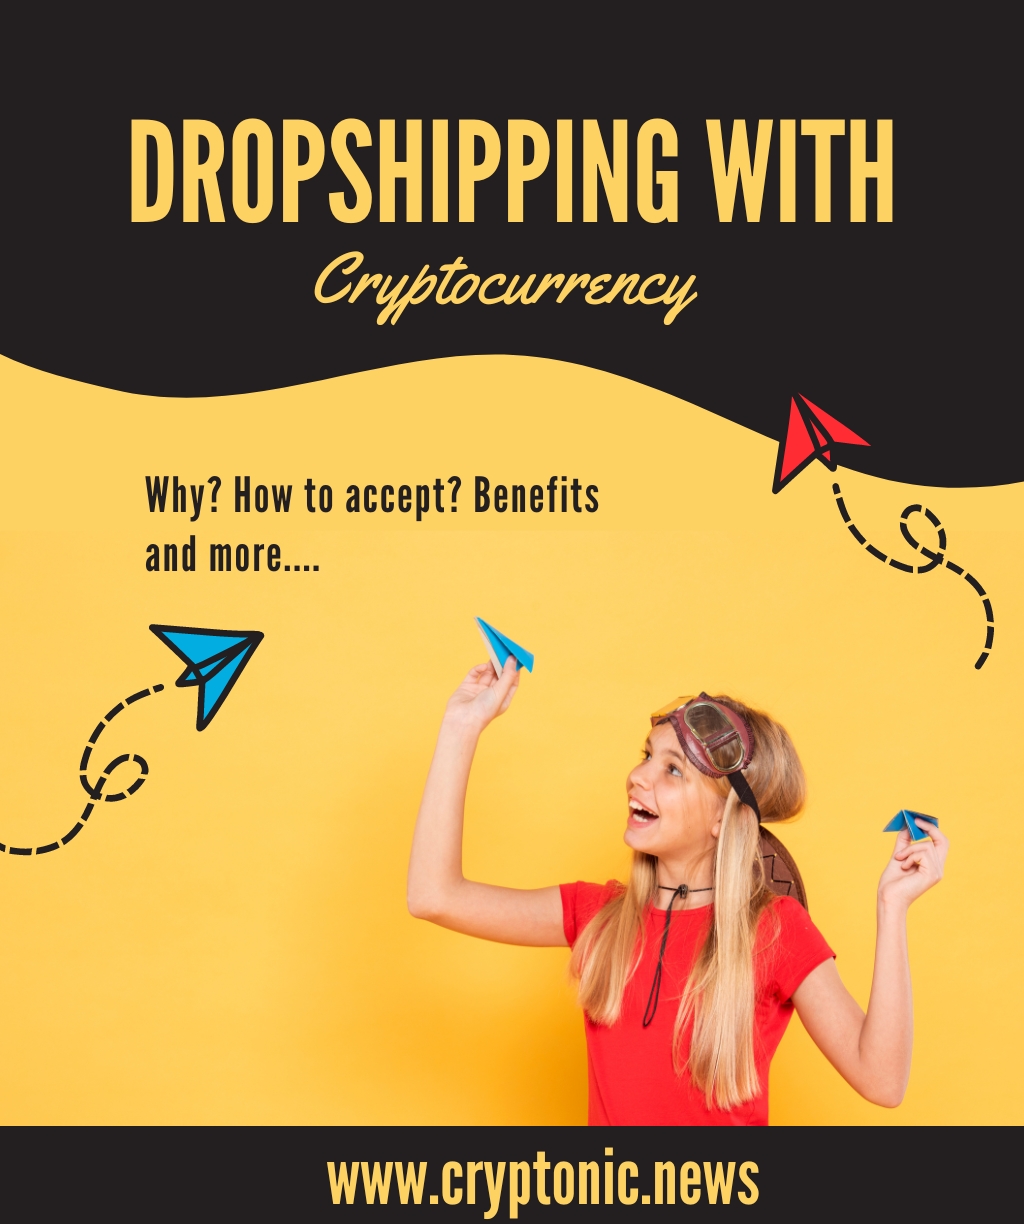 Crypto for Dropshipping: How to Accept, Benefits, Regulations etc.